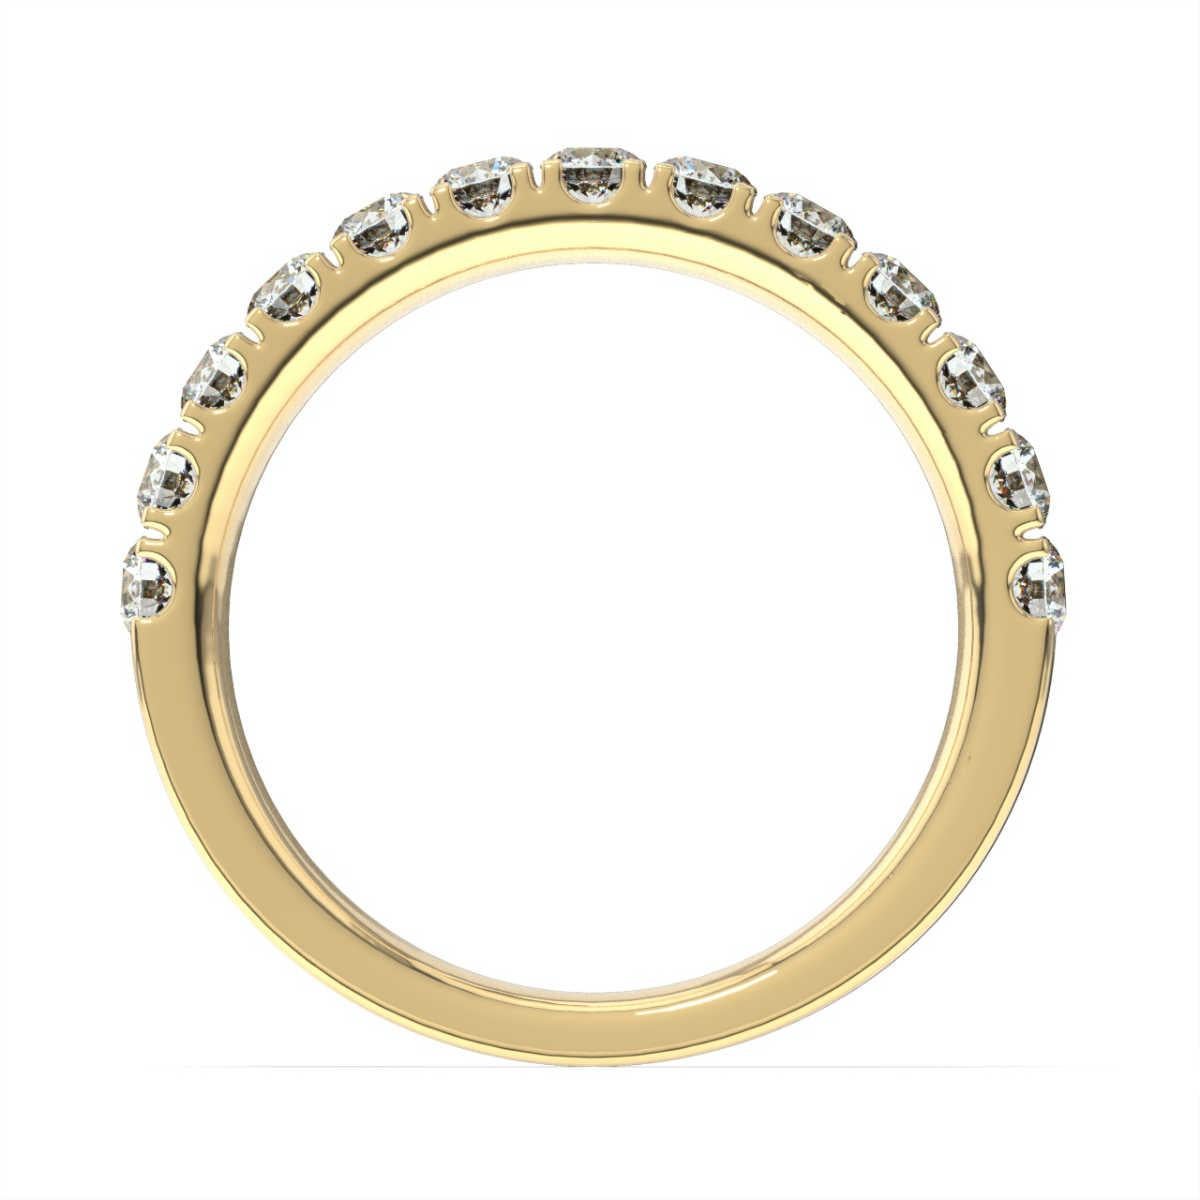 This ring features 13 perfectly matched round brilliant diamonds micro-prong set. Experience the difference!

Product details: 

Center Gemstone Color: WHITE
Side Gemstone Type: NATURAL DIAMOND
Side Gemstone Shape: ROUND
Metal: 14K Yellow Gold
Metal